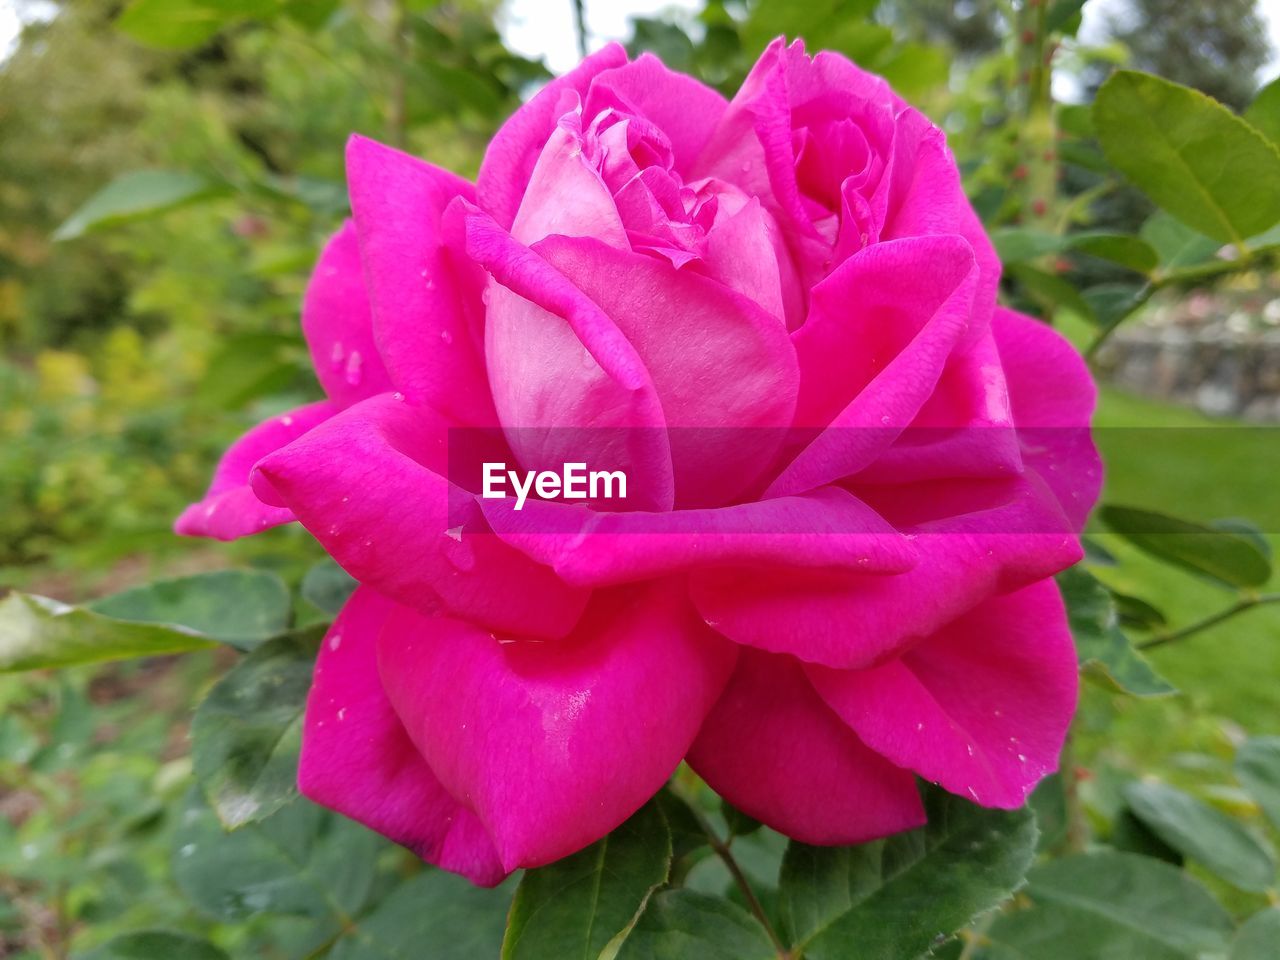 CLOSE-UP OF WET PINK ROSE GROWING OUTDOORS